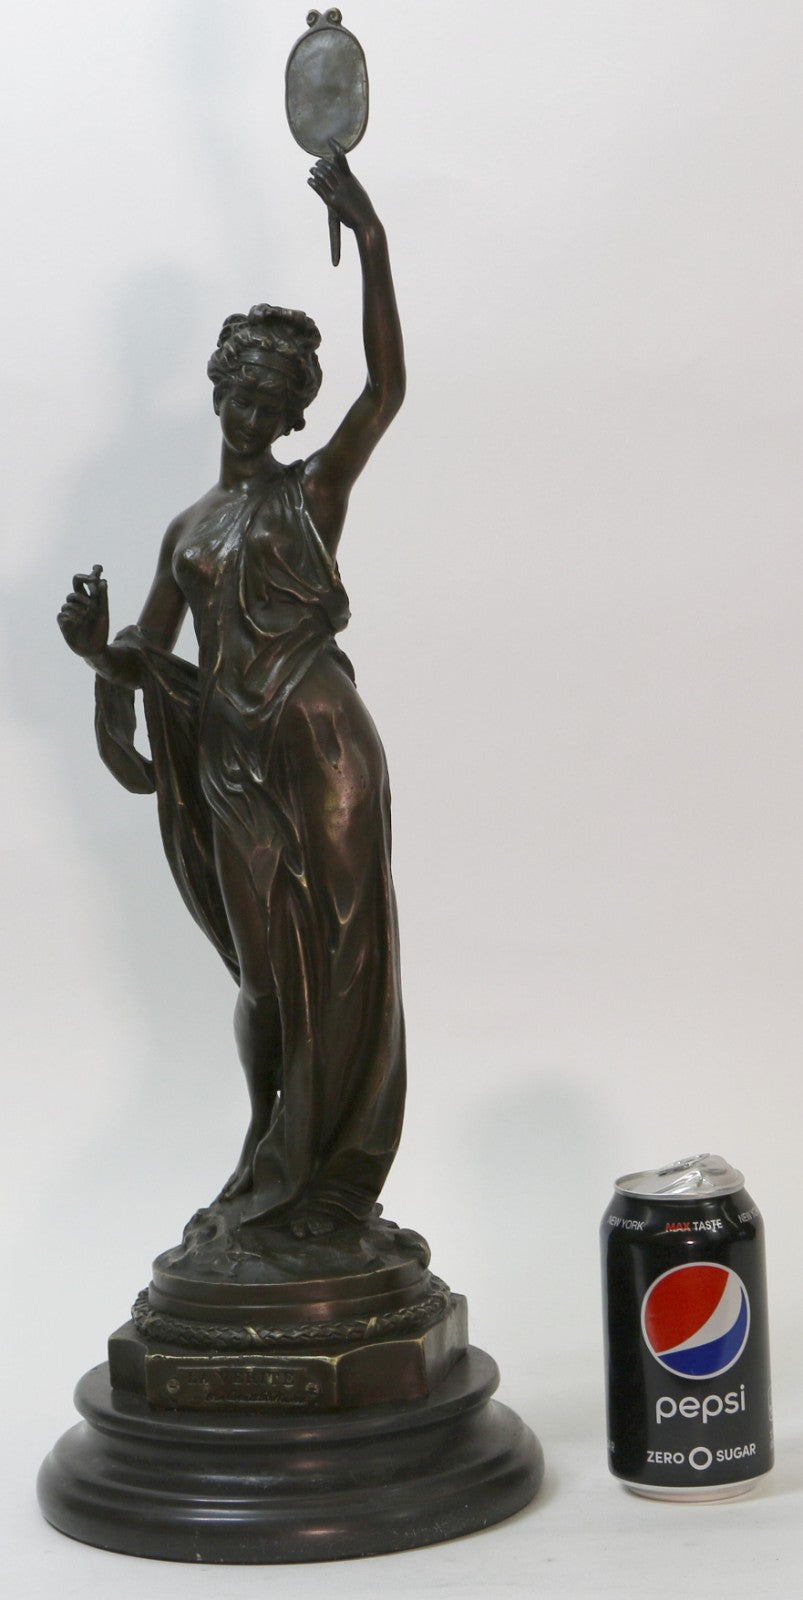 Vintage FRENCH Artwork Classical BRONZE STATUE Seated MAIDEN Roman Greek MOREAU